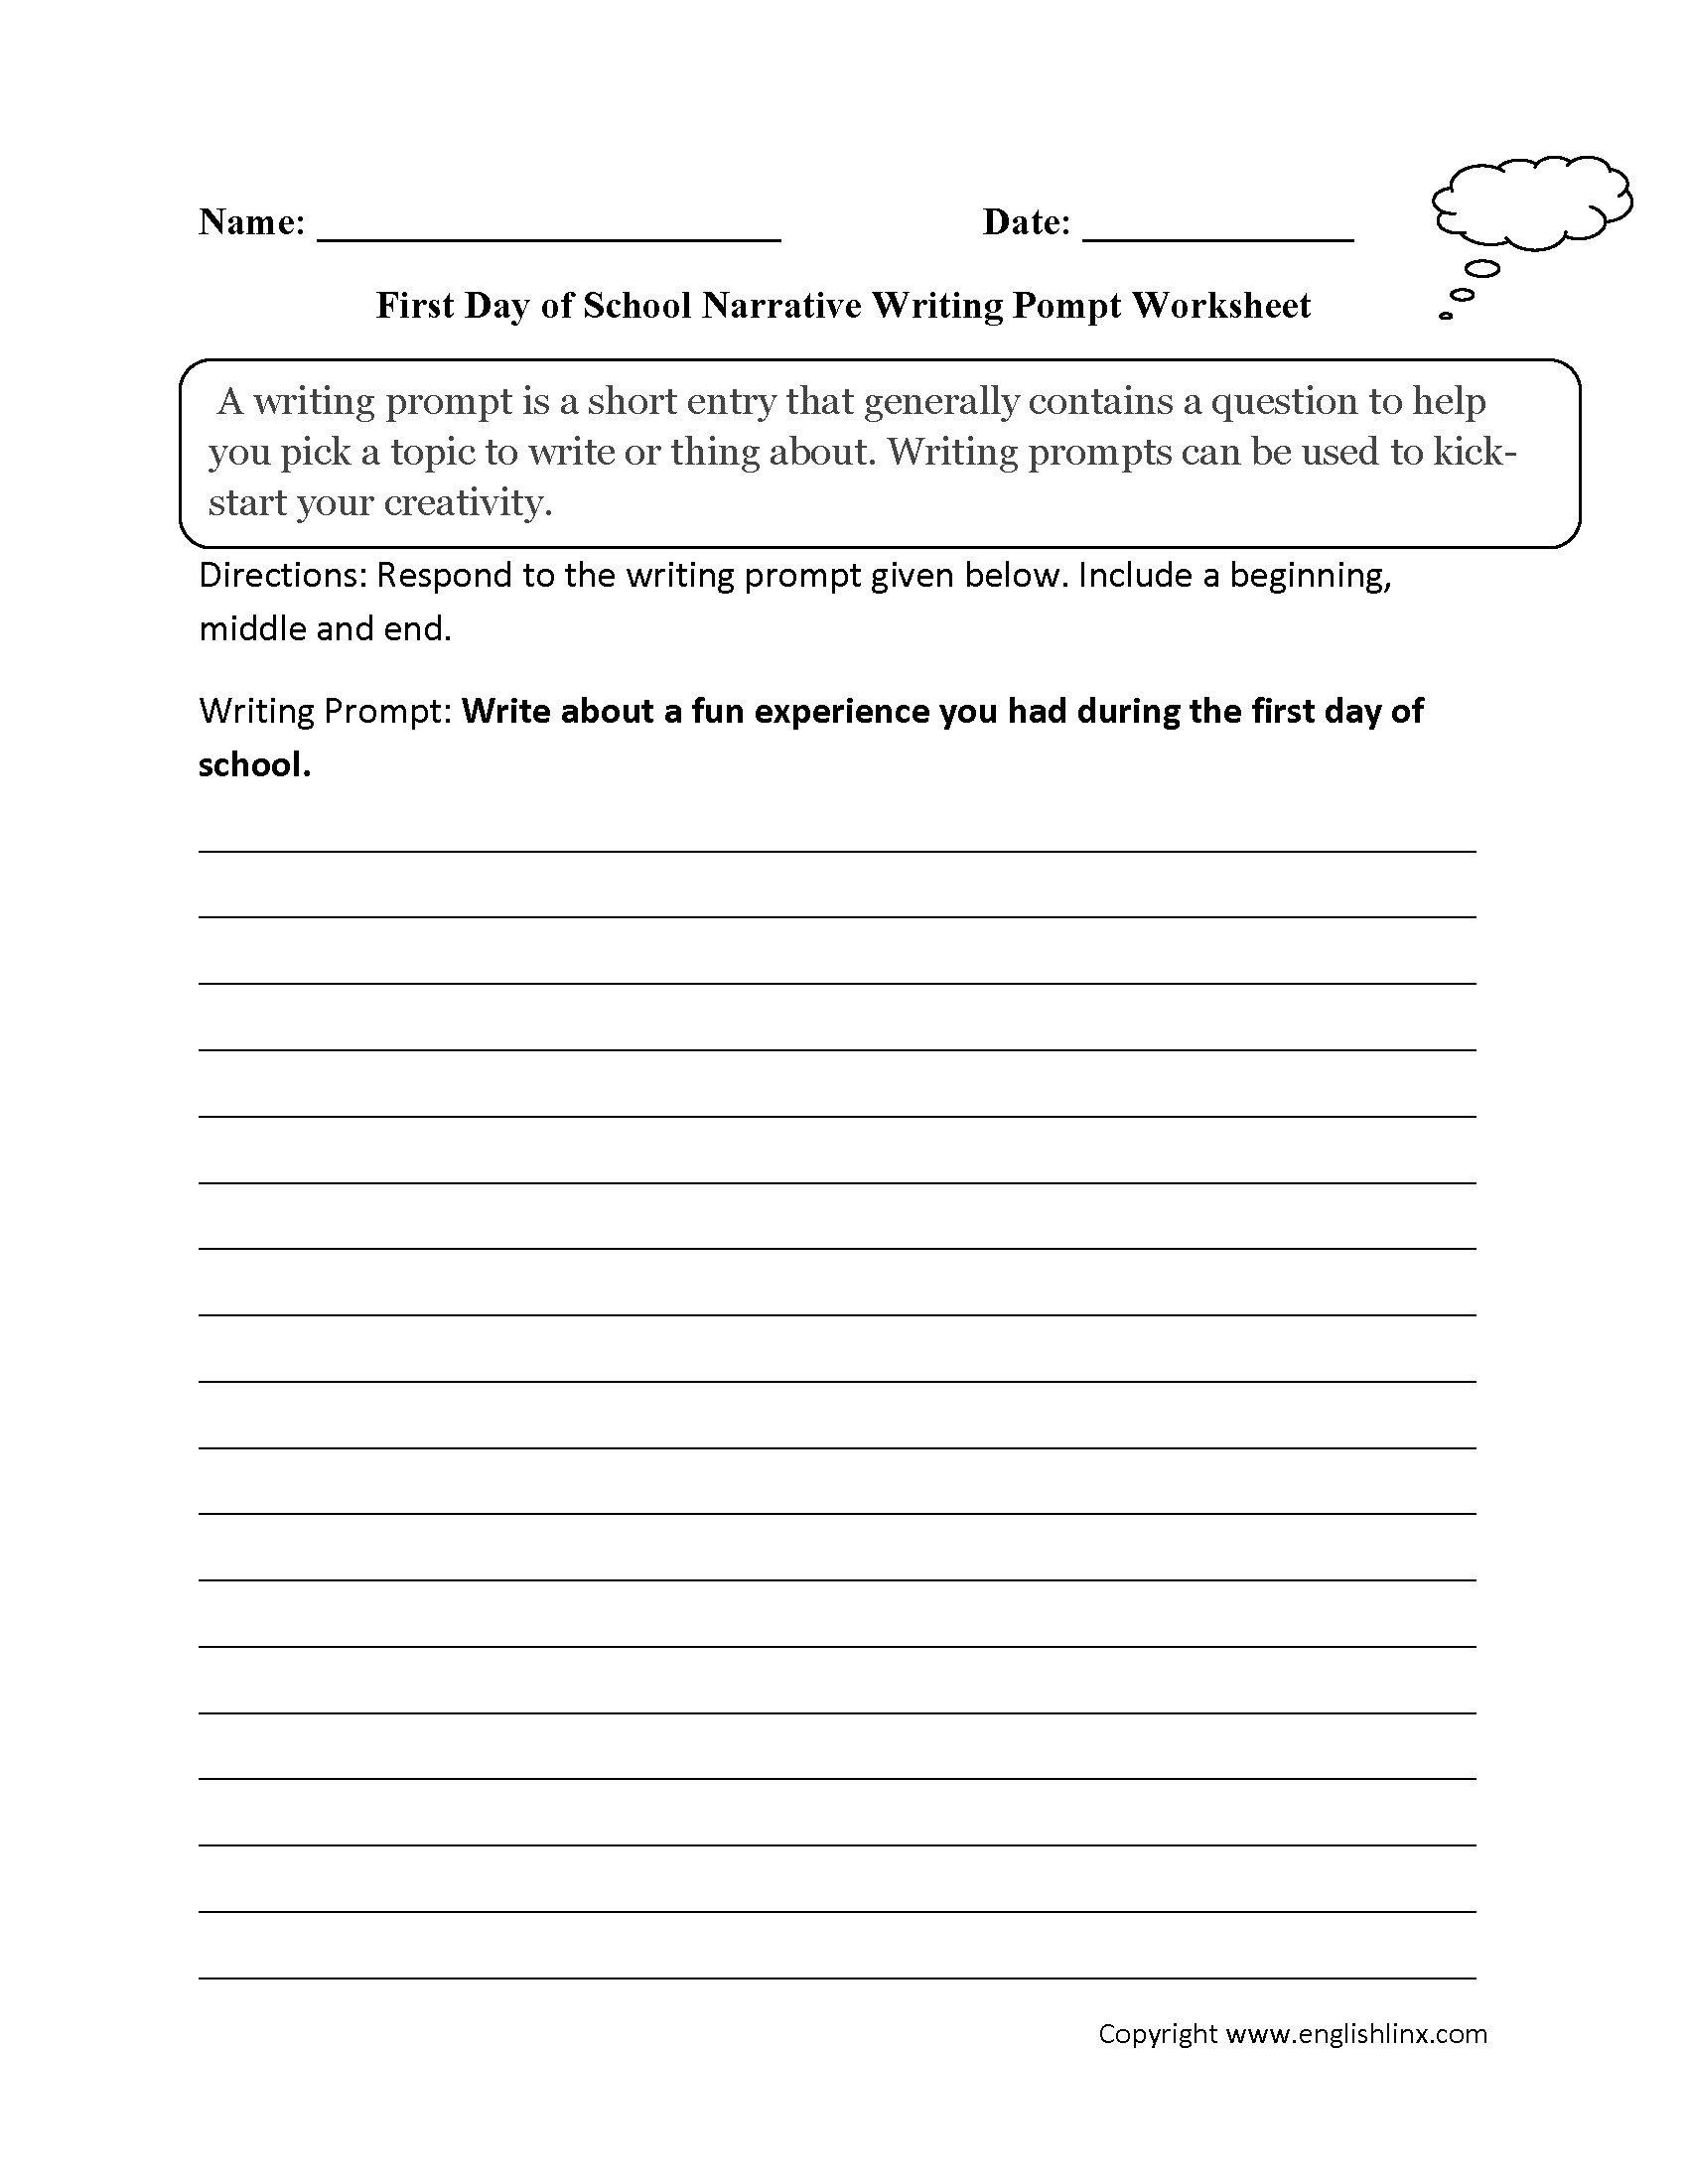 Writing Prompts Worksheets | Narrative Writing Prompt Worksheets